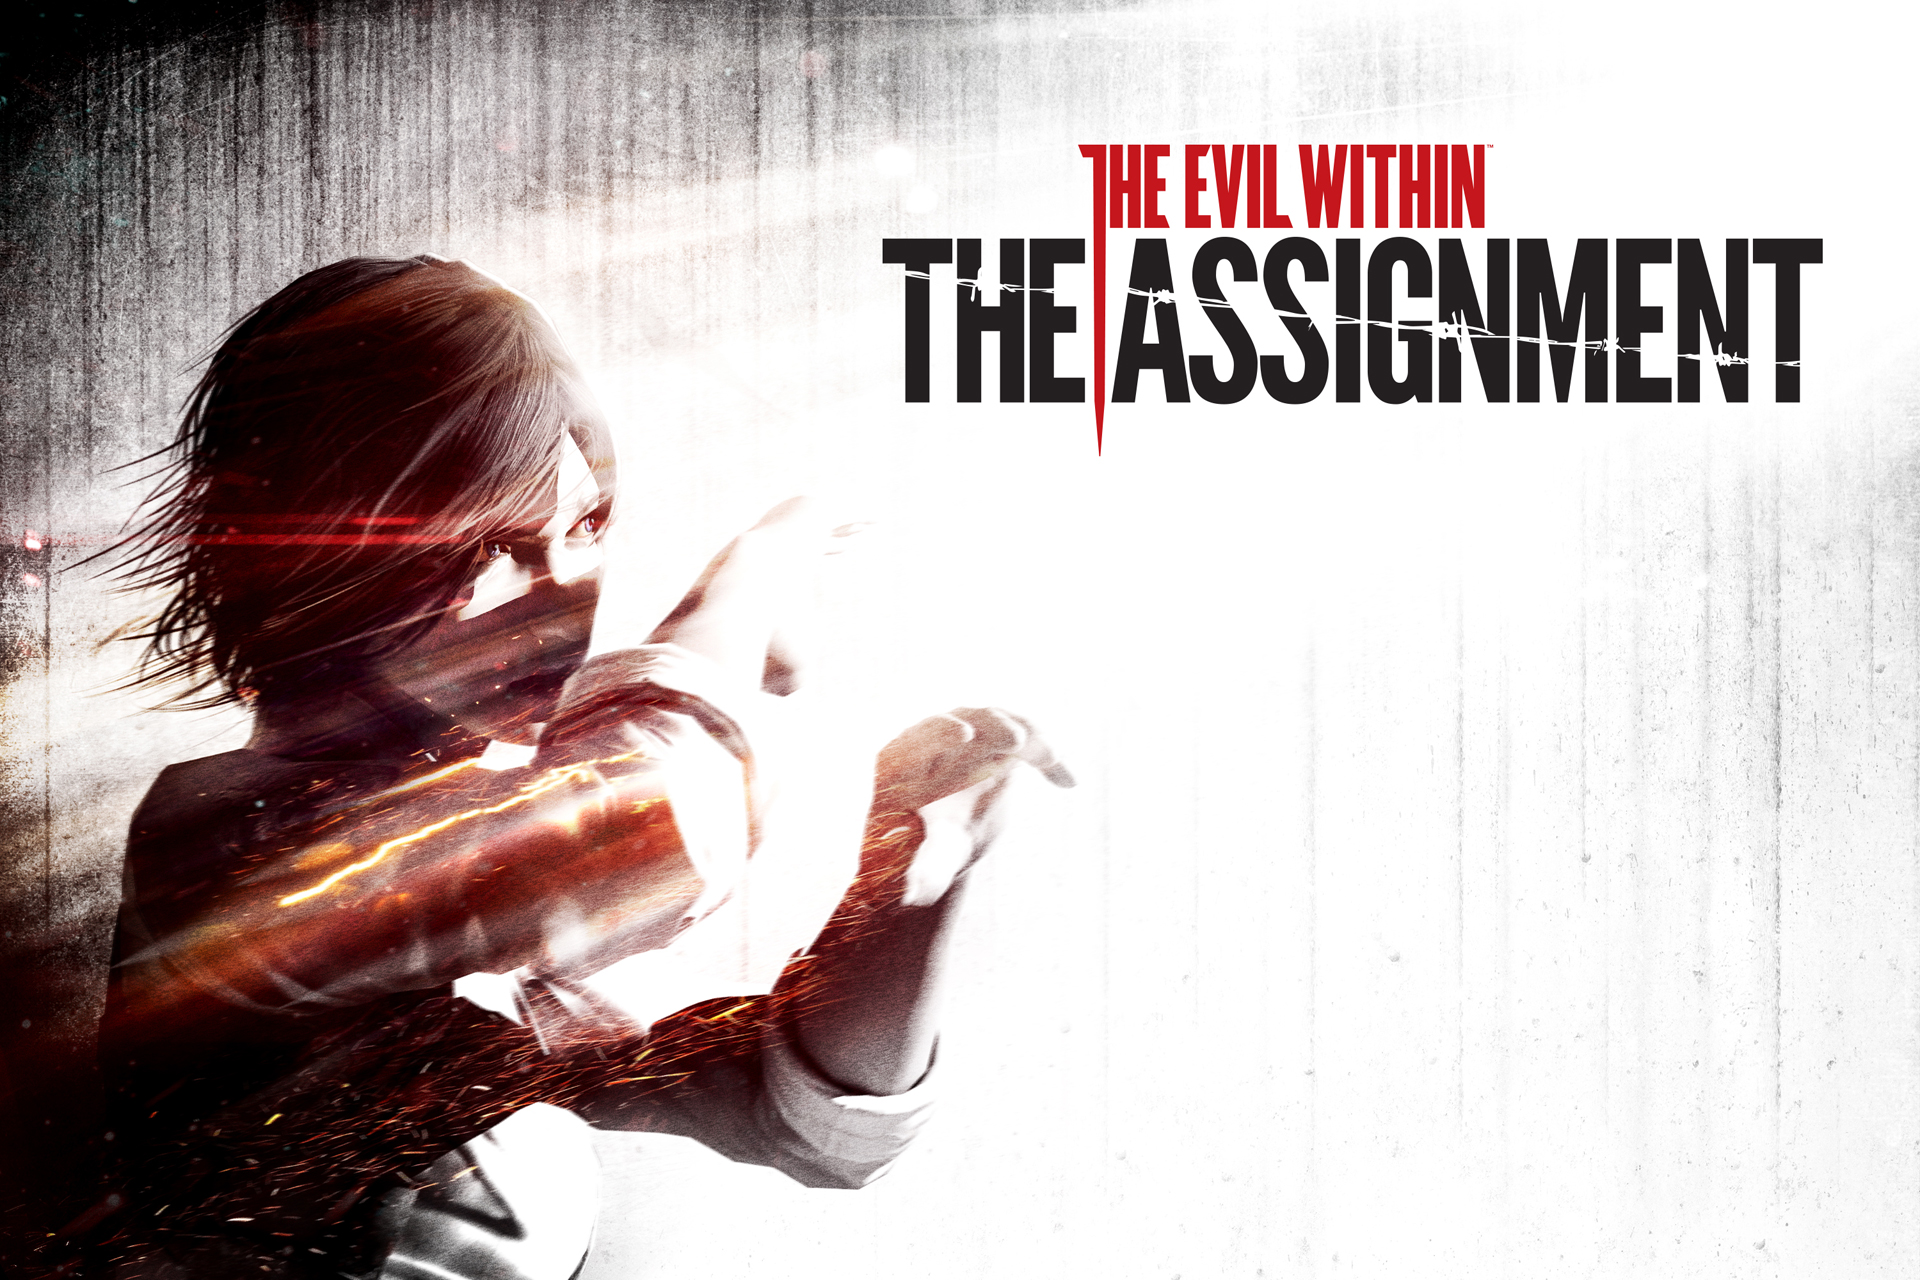 The Evil Within #3